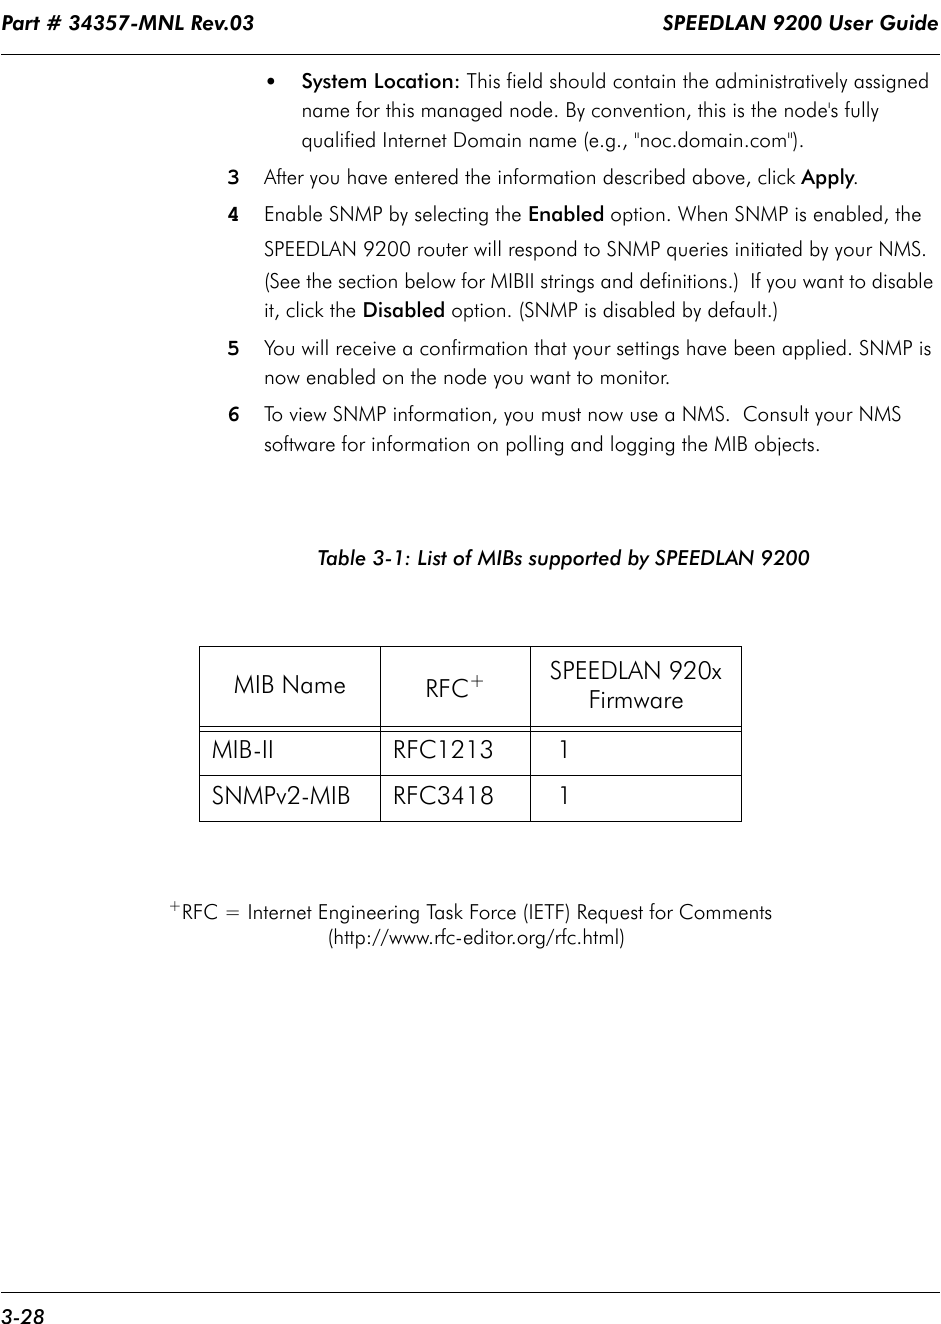 Part # 34357-MNL Rev.03                                                                   SPEEDLAN 9200 User Guide 3-28•System Location: This field should contain the administratively assigned name for this managed node. By convention, this is the node&apos;s fully qualified Internet Domain name (e.g., &quot;noc.domain.com&quot;).3After you have entered the information described above, click Apply.4Enable SNMP by selecting the Enabled option. When SNMP is enabled, the SPEEDLAN 9200 router will respond to SNMP queries initiated by your NMS. (See the section below for MIBII strings and definitions.)  If you want to disable it, click the Disabled option. (SNMP is disabled by default.)5You will receive a confirmation that your settings have been applied. SNMP is now enabled on the node you want to monitor. 6To view SNMP information, you must now use a NMS.  Consult your NMS software for information on polling and logging the MIB objects.Table 3-1: List of MIBs supported by SPEEDLAN 9200+RFC = Internet Engineering Task Force (IETF) Request for Comments  (http://www.rfc-editor.org/rfc.html)MIB Name RFC+SPEEDLAN 920x FirmwareMIB-II RFC1213   1SNMPv2-MIB RFC3418   1